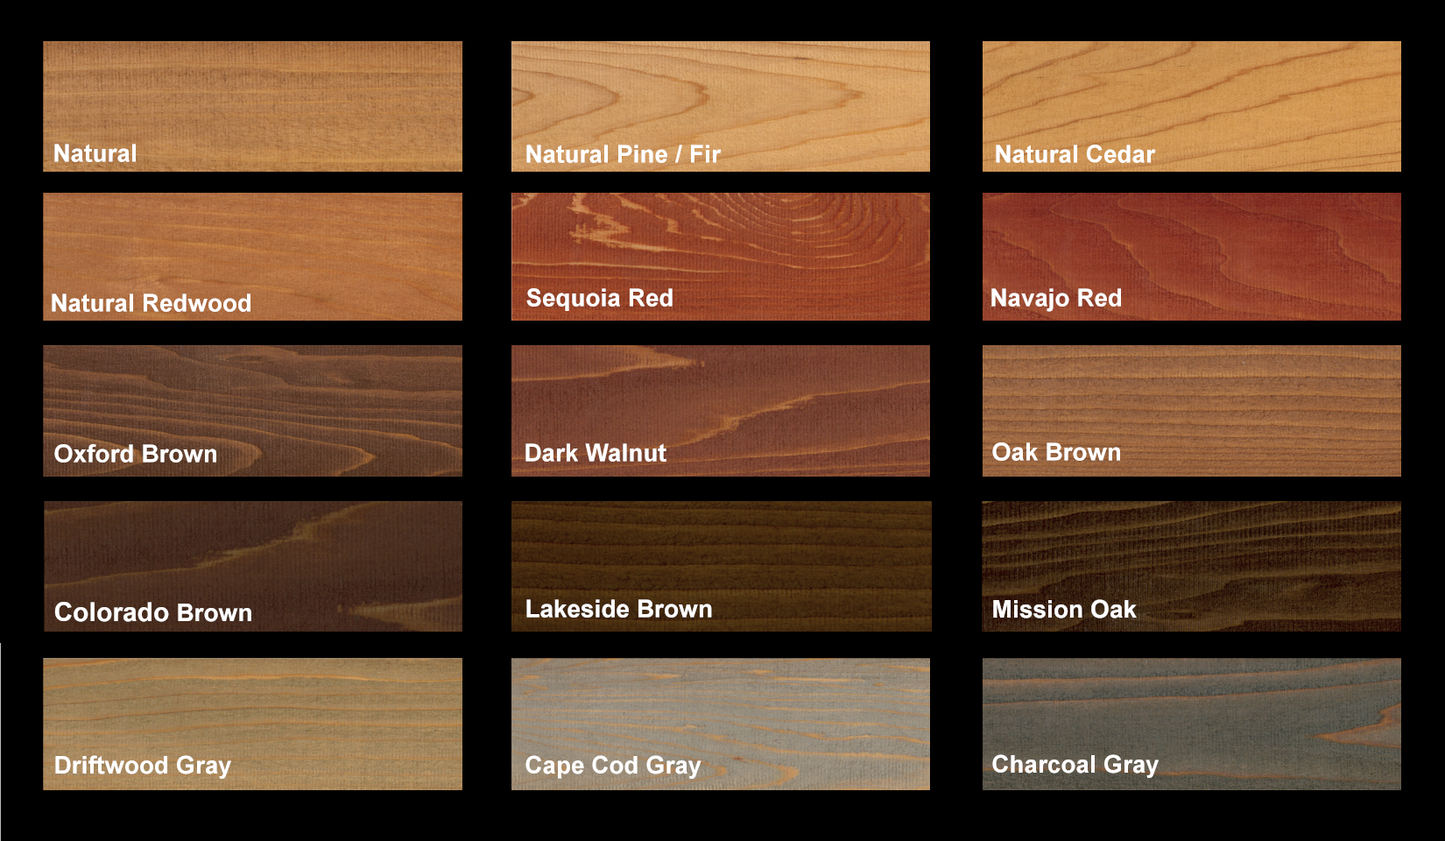 Messmer's Natural Wood Finishes UV Plus